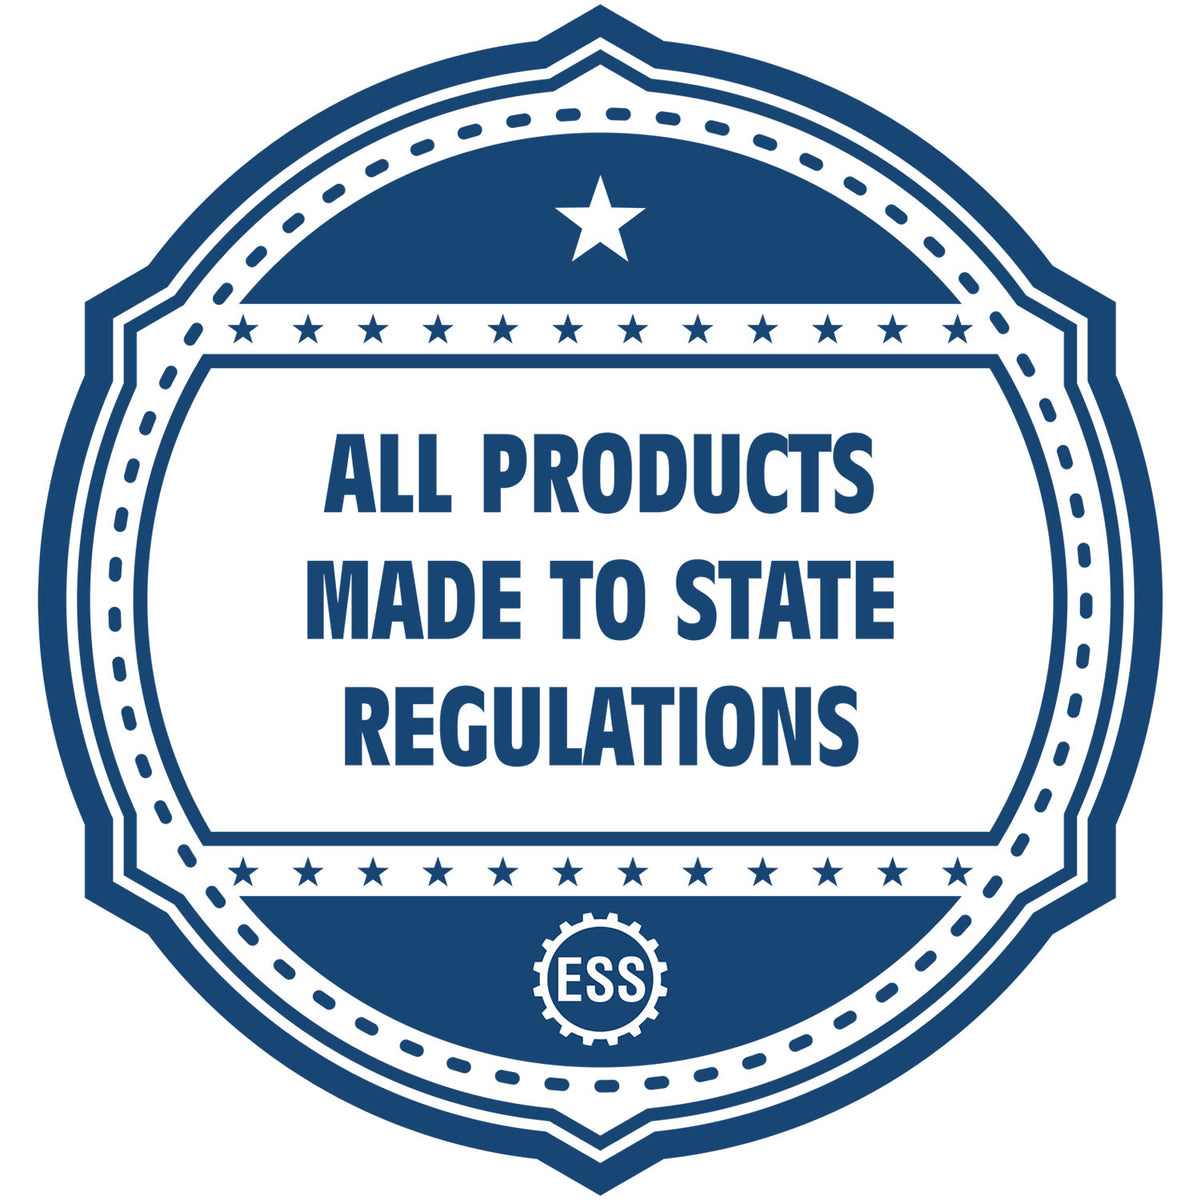 An icon or badge element for the Slim Pre-Inked District of Columbia Land Surveyor Seal Stamp showing that this product is made in compliance with state regulations.